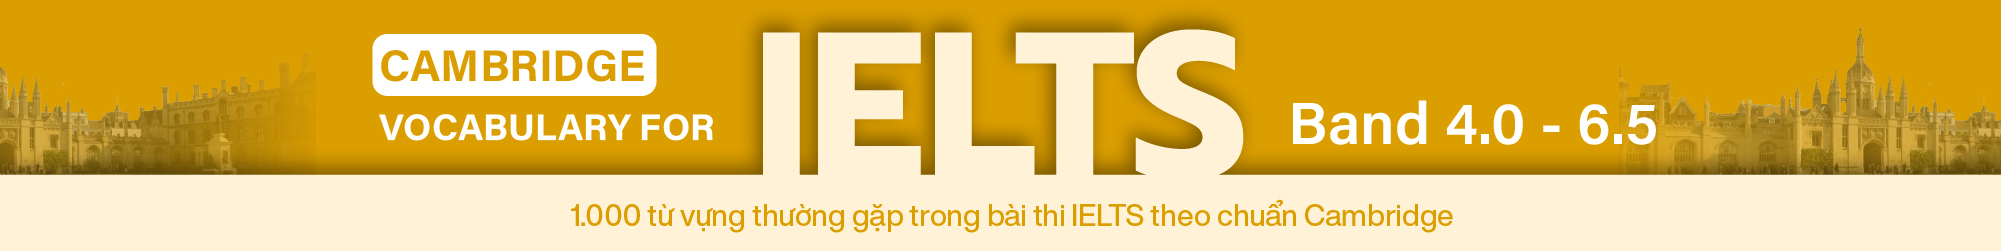 CAMBRIDGE VOCABULARY FOR IELTS (BAND 4.0 - 6.5)